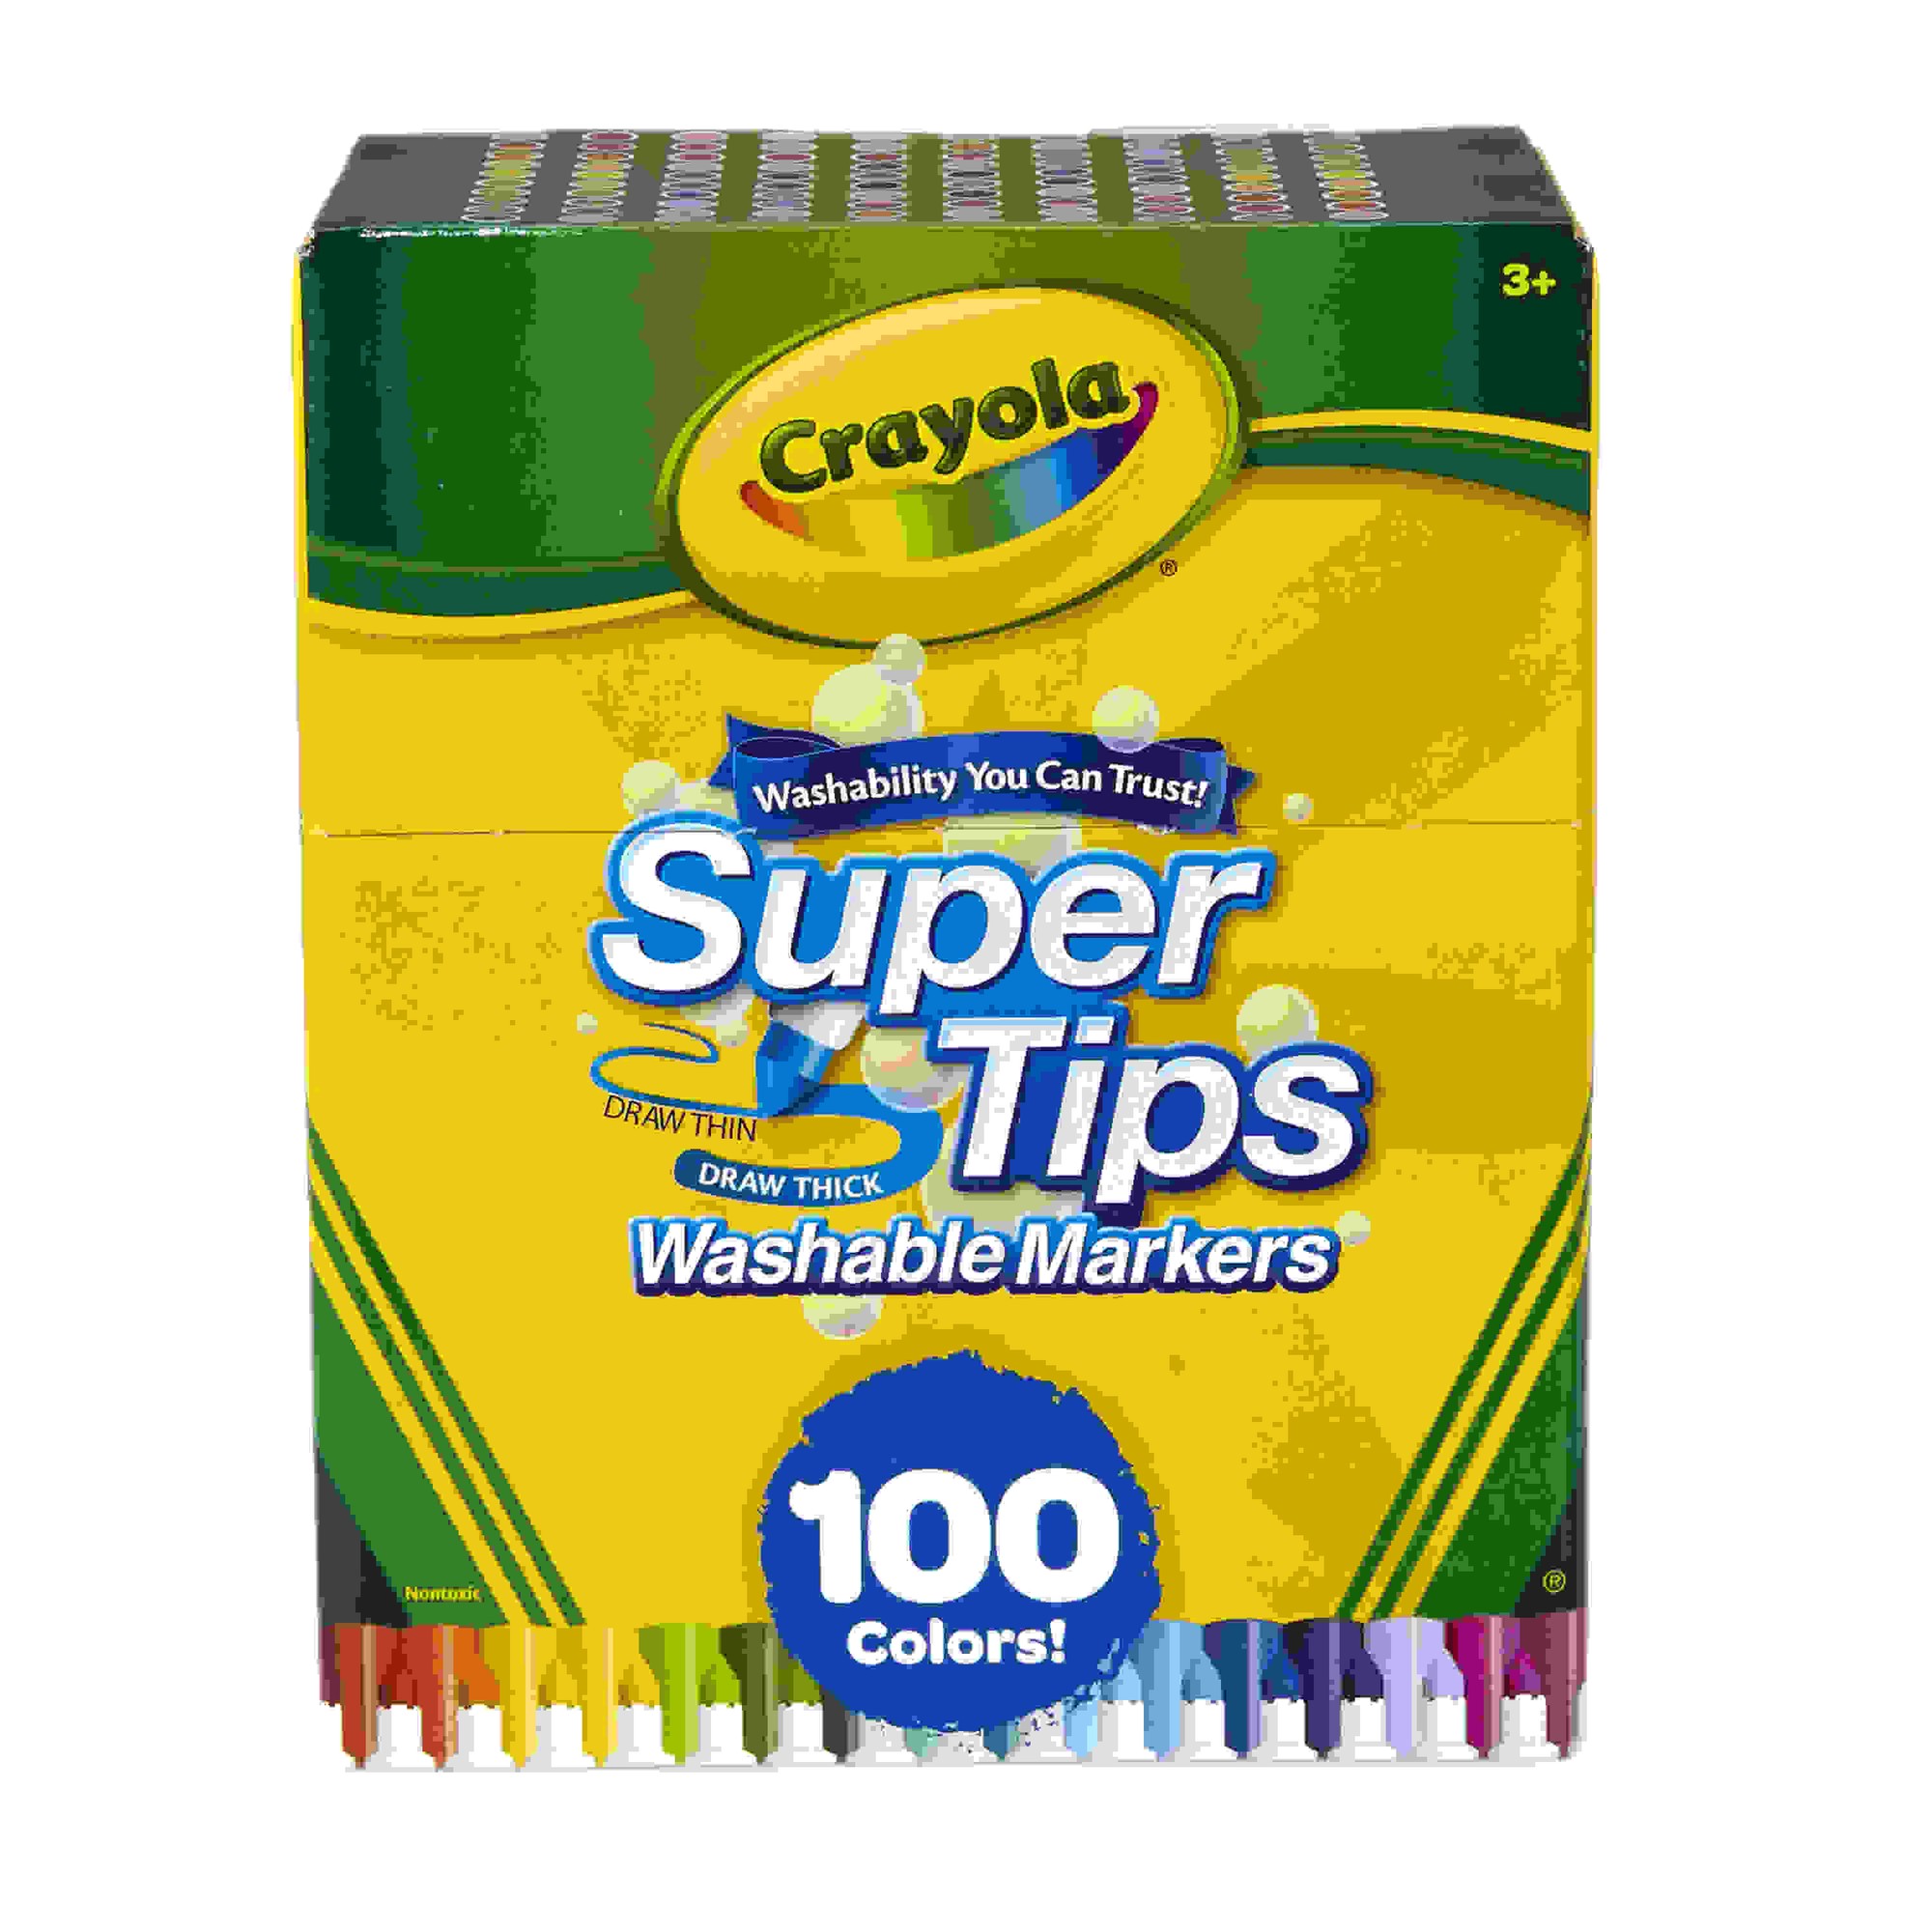 Washable Super Tips Markers, Pack of 100